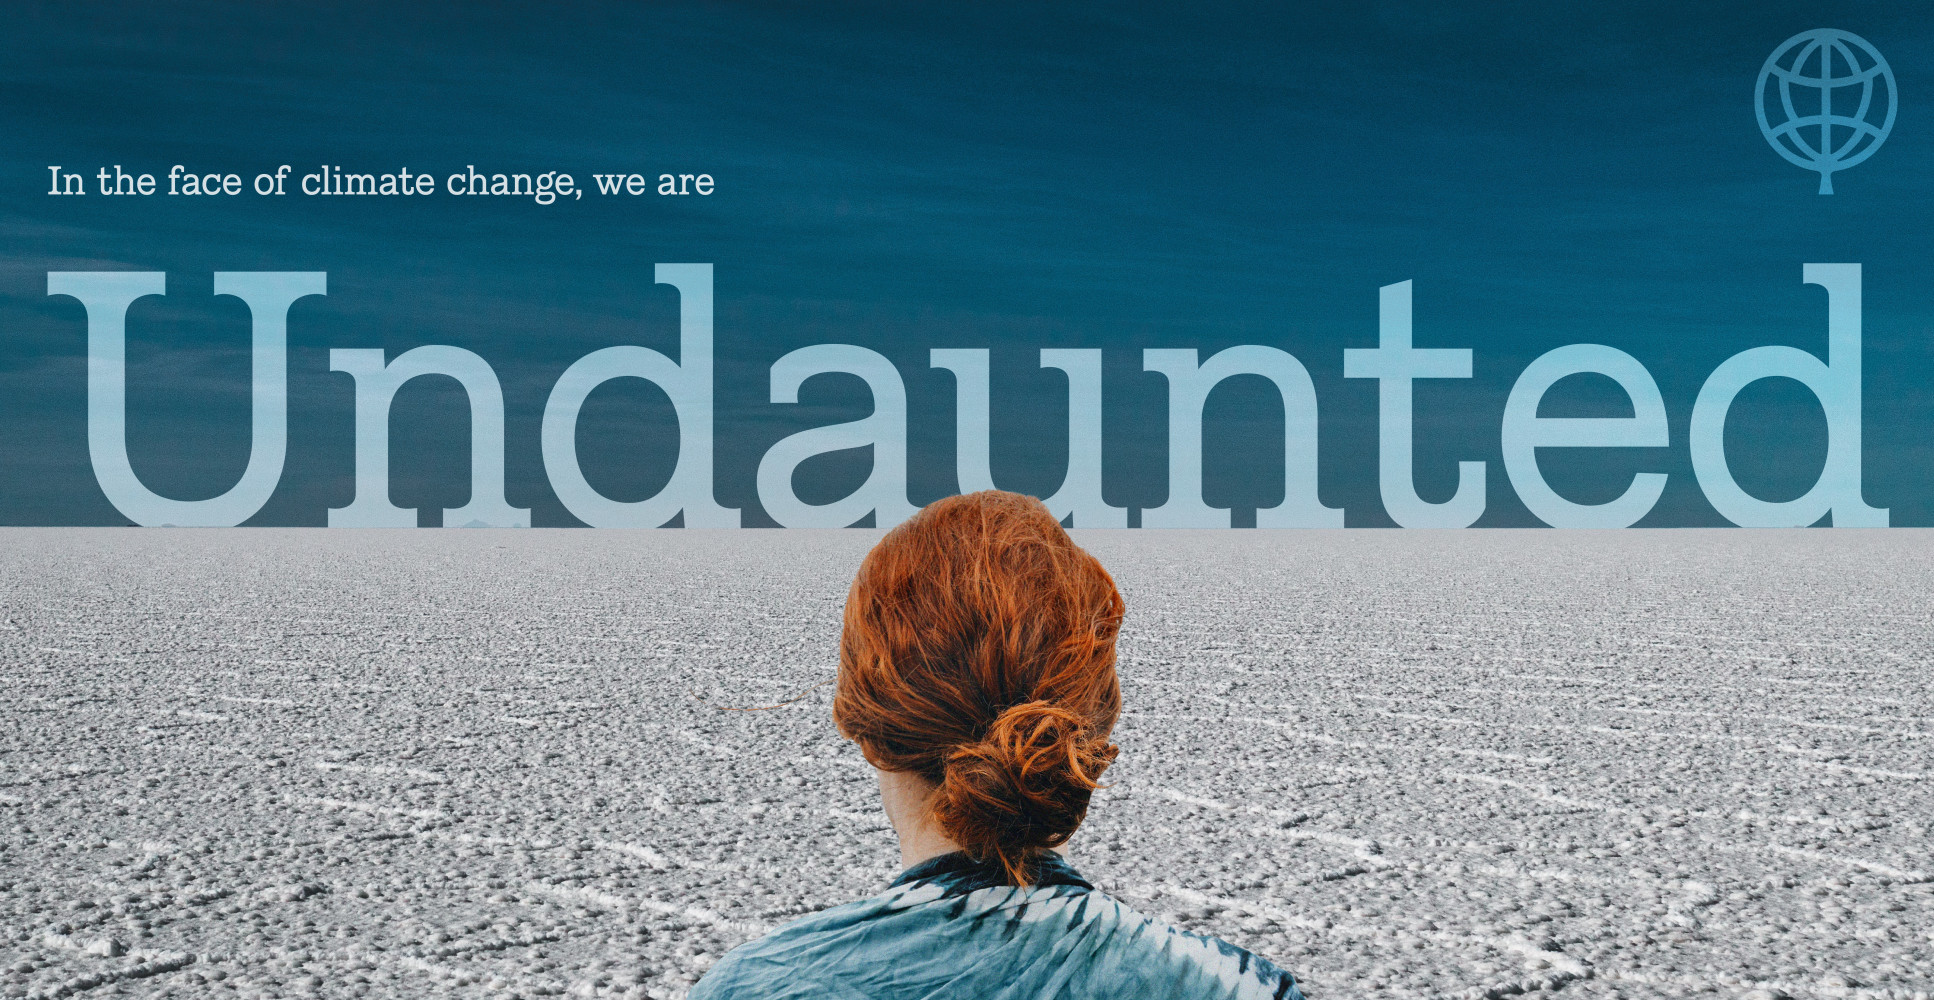 In the face of climate change, we are Undaunted